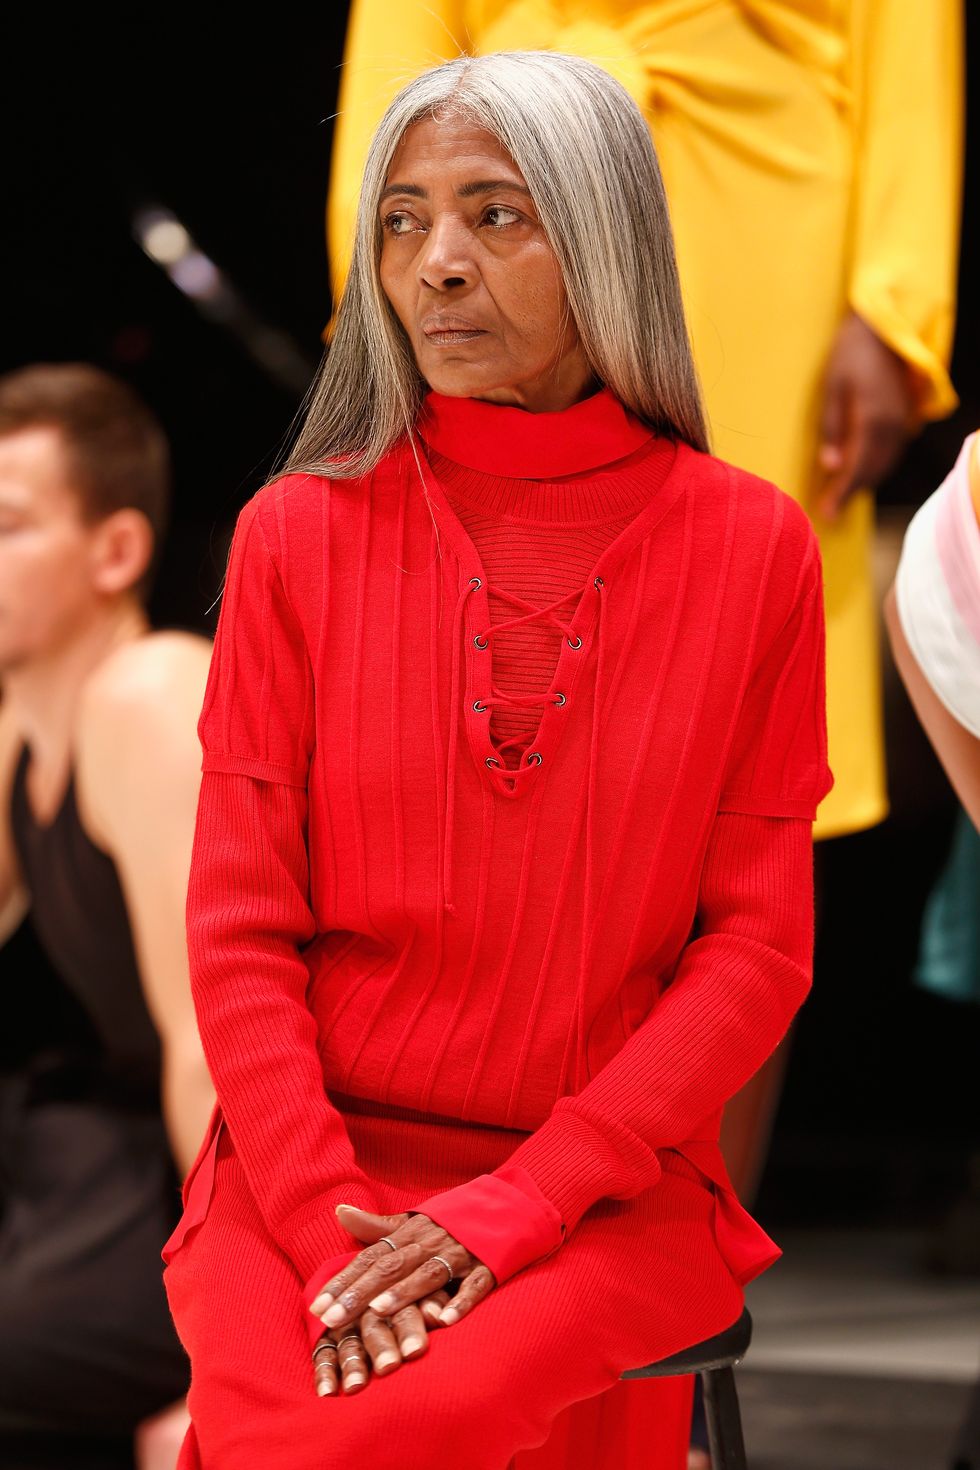 Red, Yellow, Fashion, Event, Blond, Outerwear, Performance, Ceremony, 